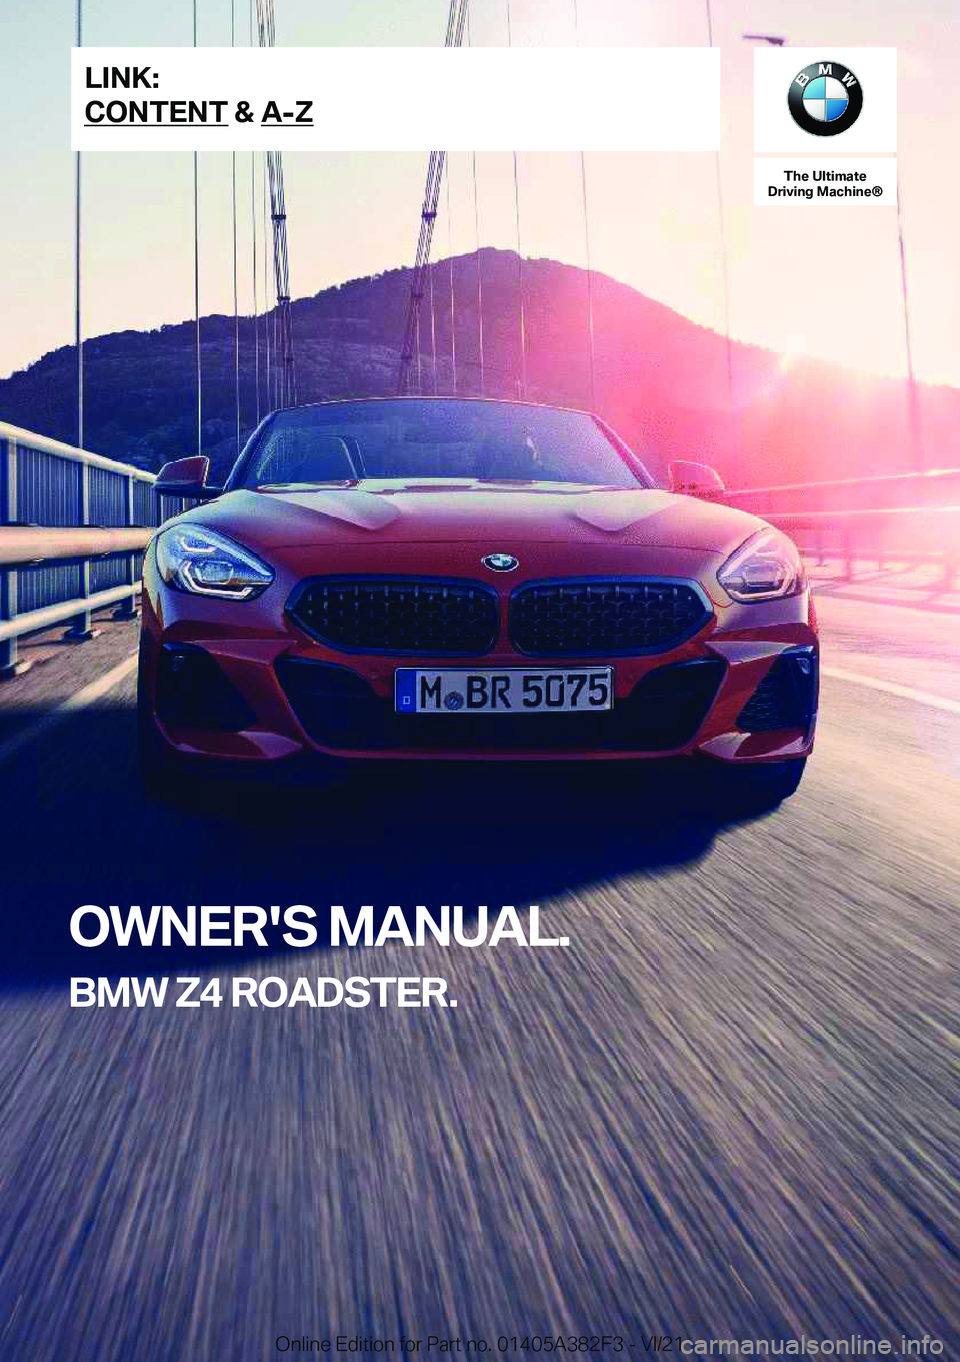 BMW Z4 2022  Owners Manual �T�h�e��U�l�t�i�m�a�t�e
�D�r�i�v�i�n�g��M�a�c�h�i�n�e�n
�O�W�N�E�R�'�S��M�A�N�U�A�L�.
�B�M�W��Z�4��R�O�A�D�S�T�E�R�.�L�I�N�K�:
�C�O�N�T�E�N�T��&��A�-�Z�O�n�l�i�n�e��E�d�i�t�i�o�n��f�o�r�